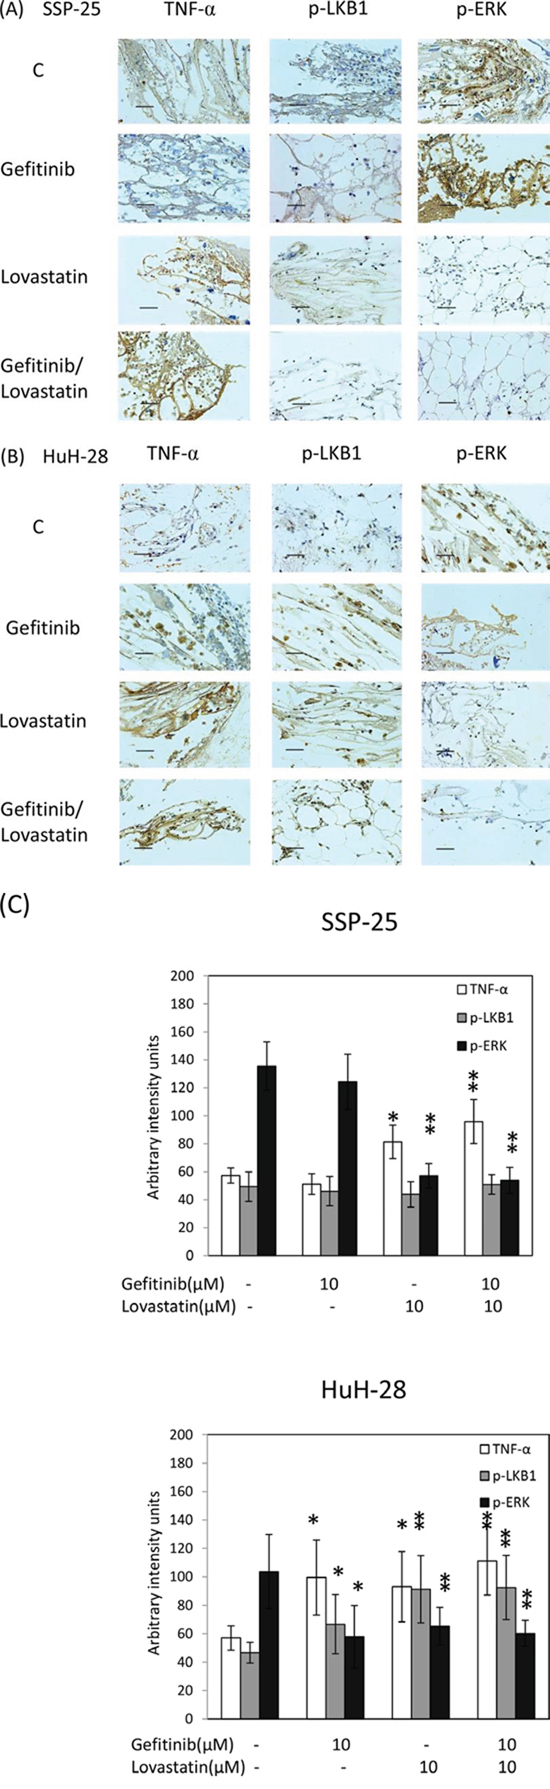 Combined treatment of lovastatin and gefitinib induced the expression of TNF&#x03B1; and inhibited the expression of p-ERK in SSP-25 and HuH-28 cell lines, and increased p-LKB1 in HuH-28 cell lines.